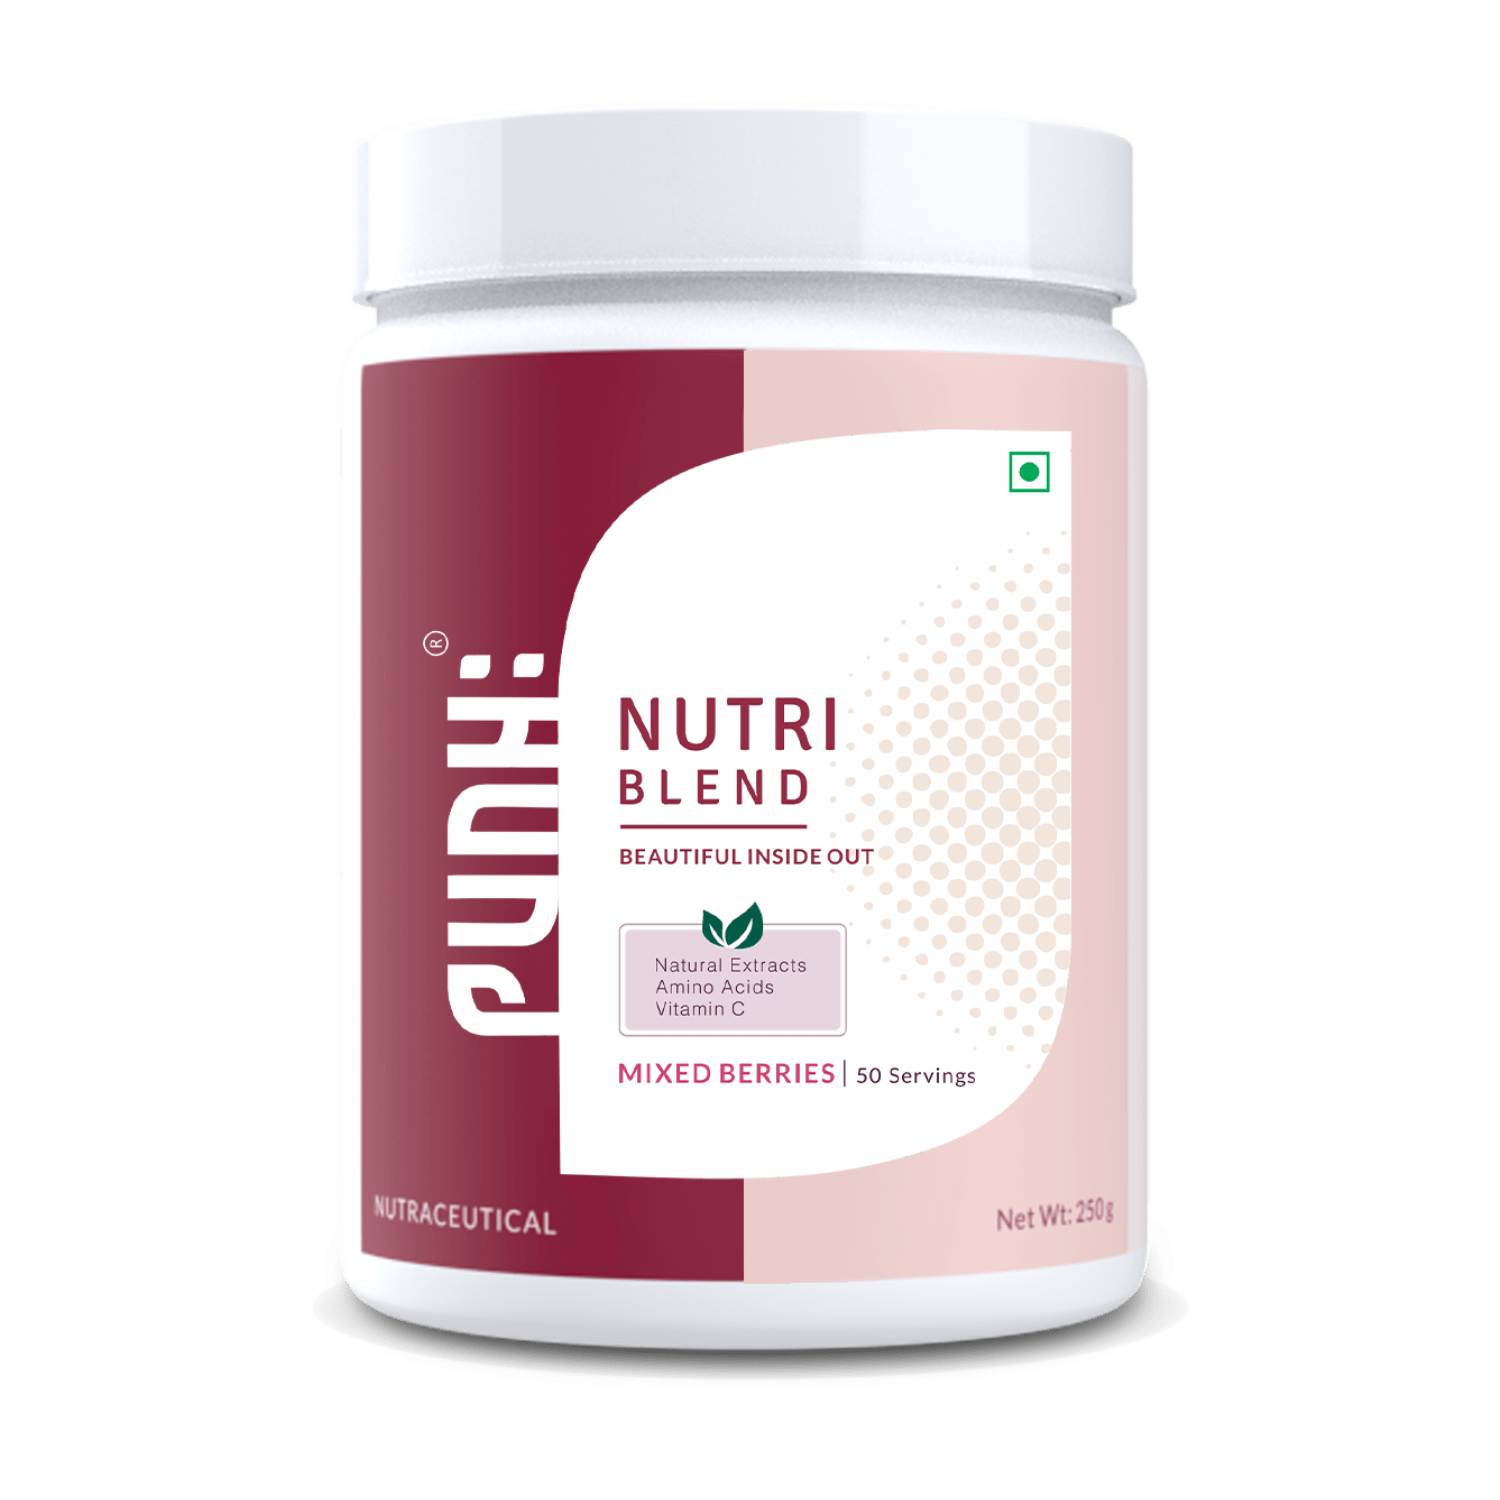 Nutri Blend - Mixed Berries | Punh: Nutrition